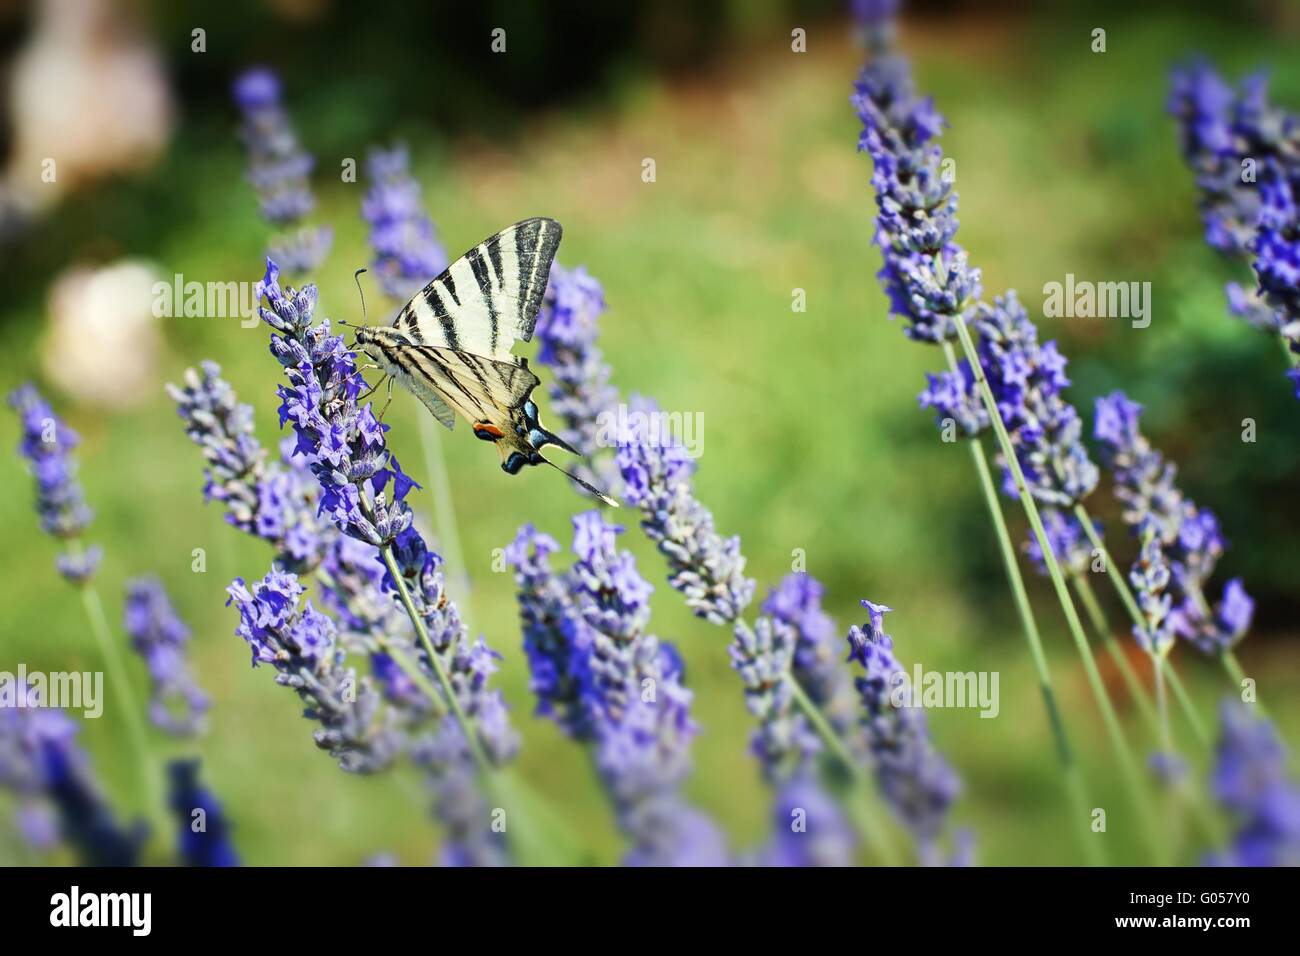 butterfly named Scarce Swallowtail in floral ambiance Stock Photo